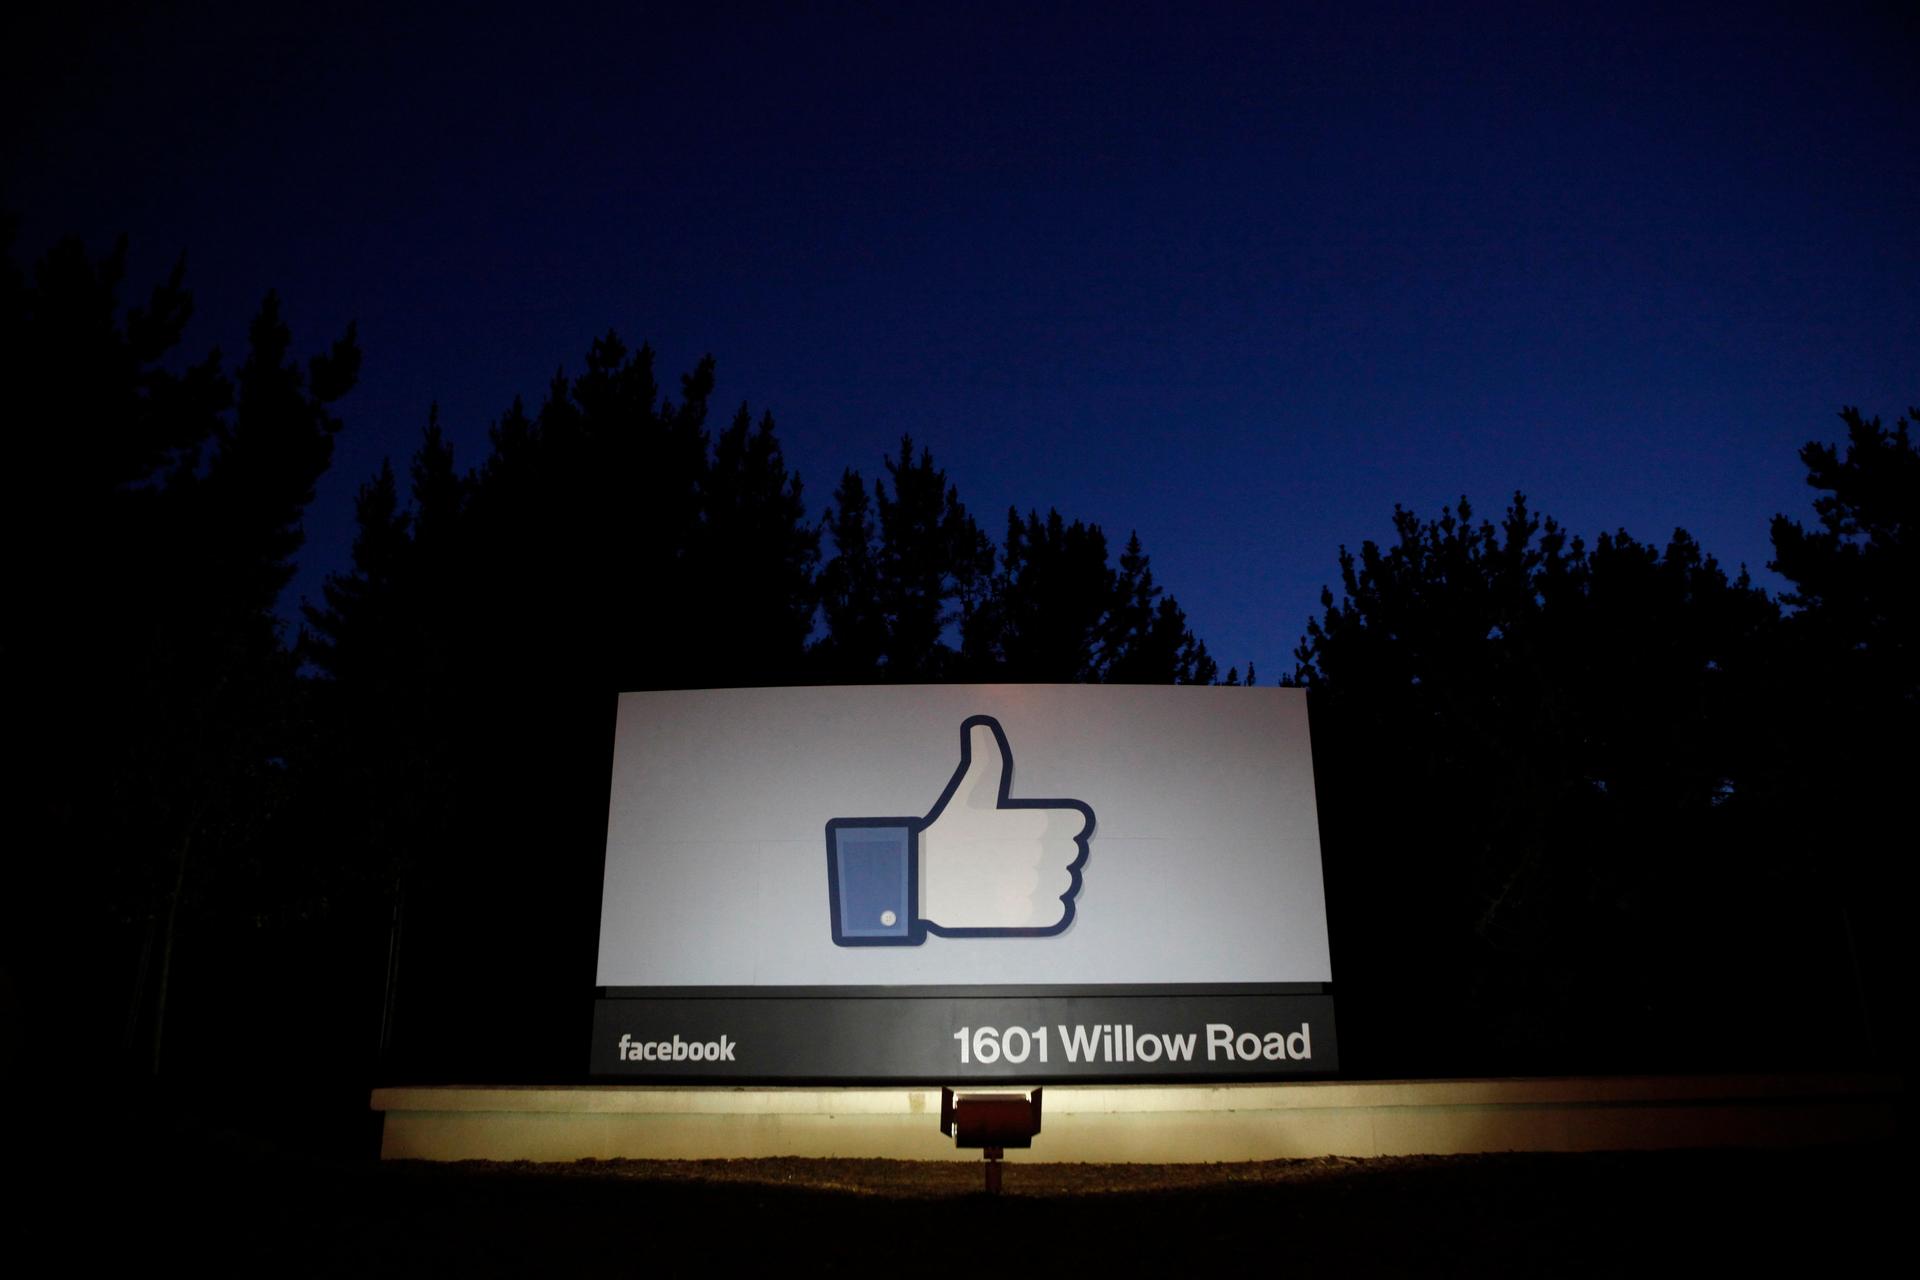 The sun rises behind the entrance sign to Facebook headquarters in Menlo Park before the company's IPO launch, May 18, 2012. Facebook Inc, will begin trading on the Nasdaq market on Friday, with it's initial public offering at $38 per share, valuing the w